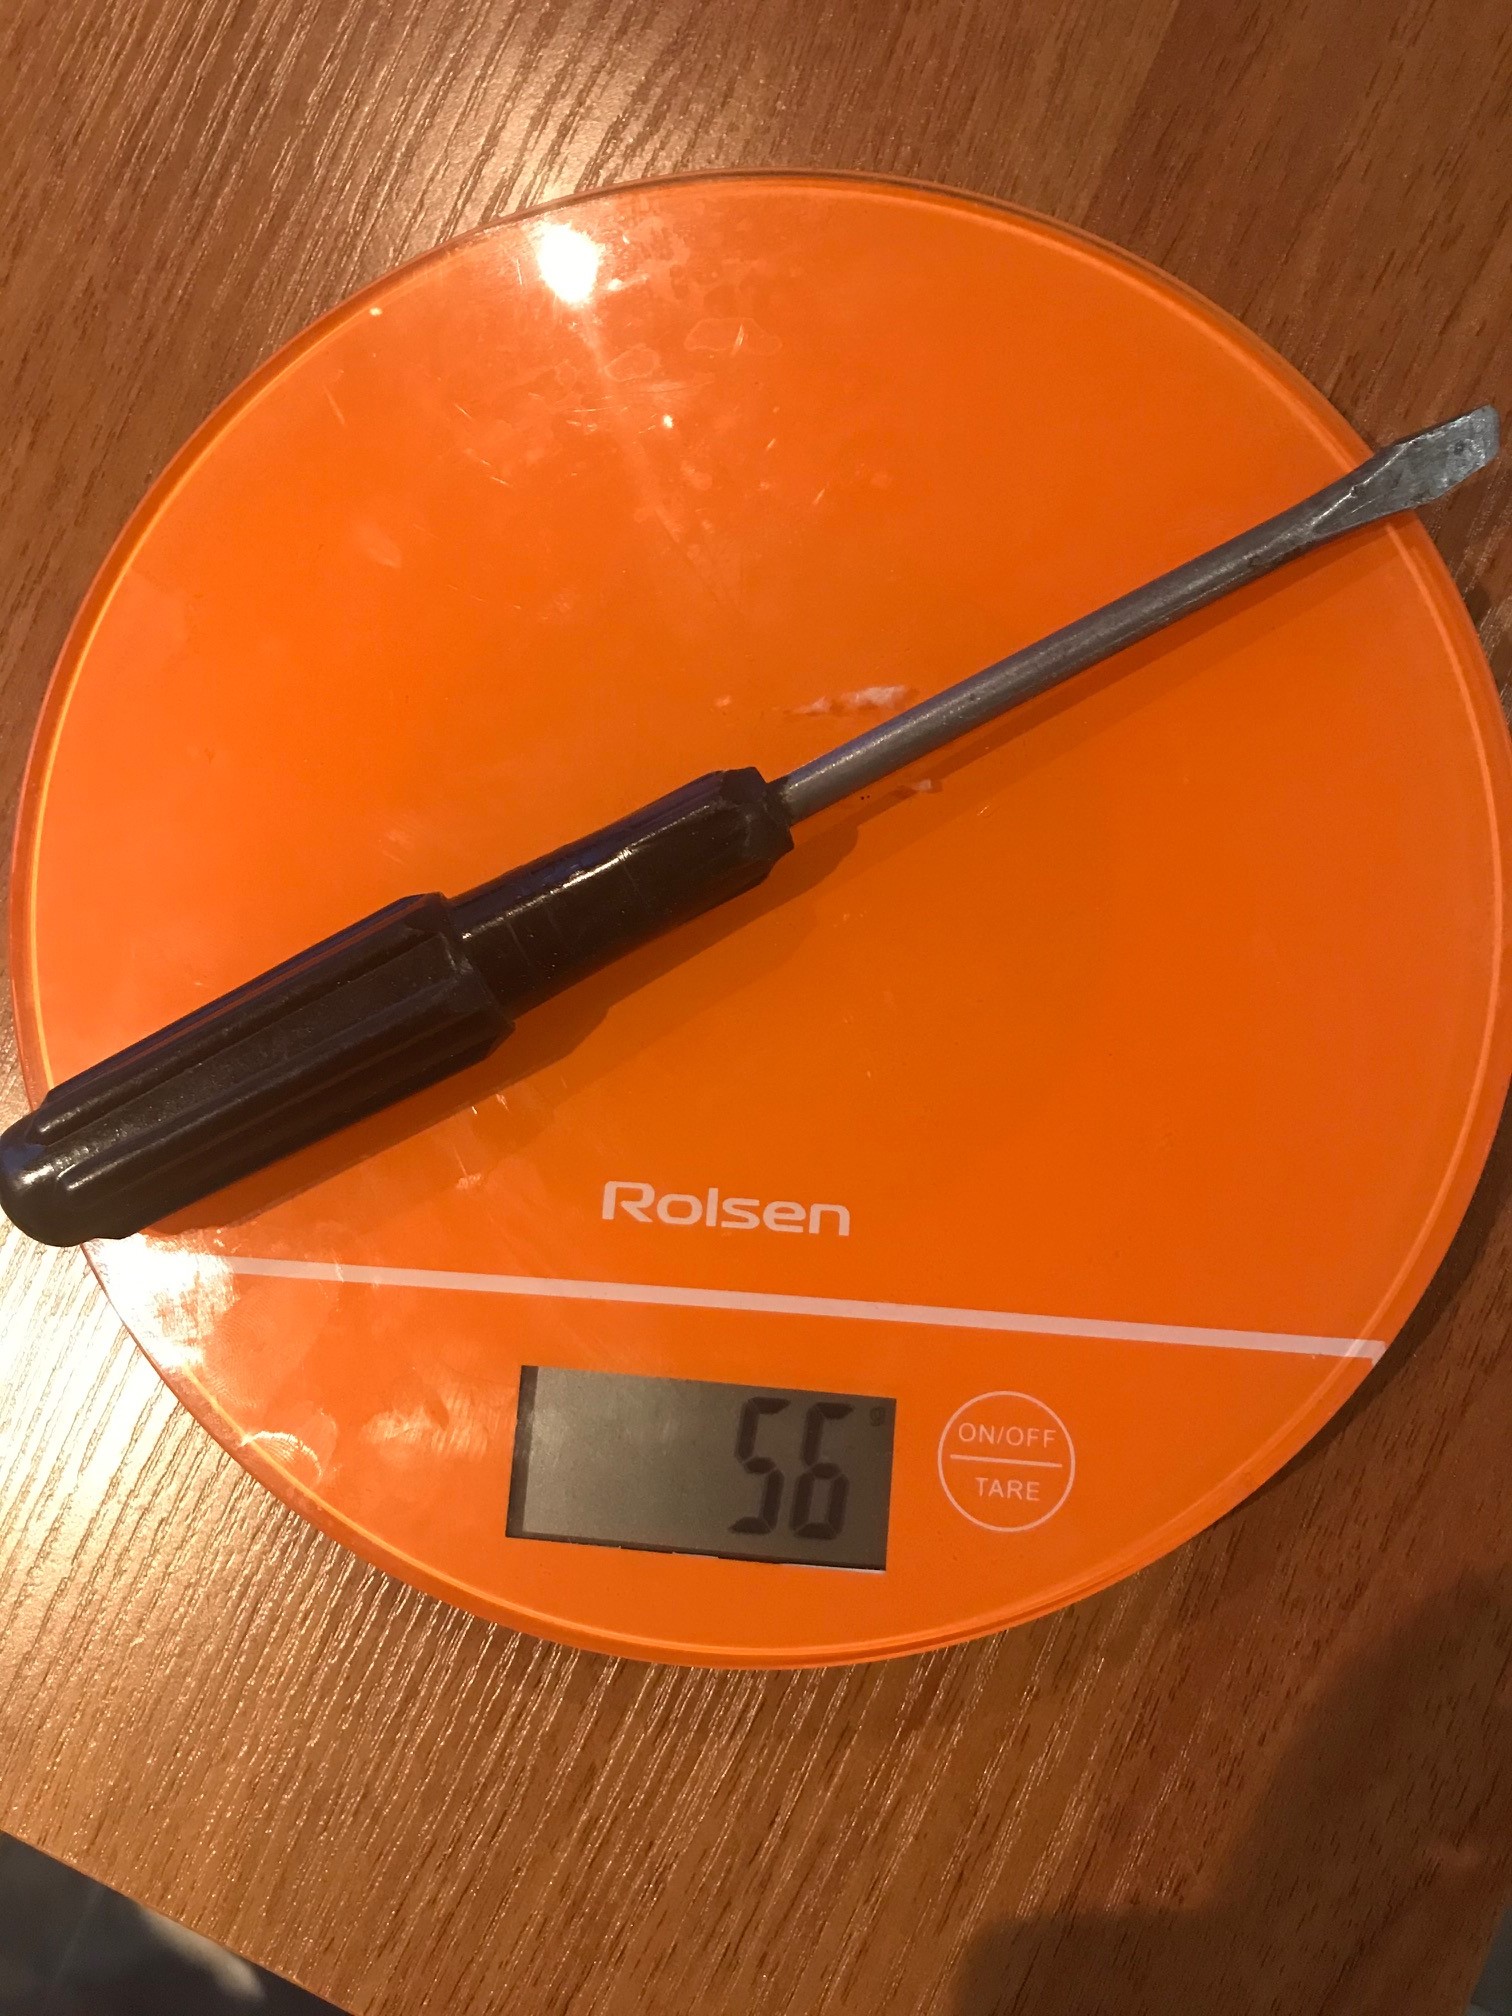 How much does a minus screwdriver weigh?